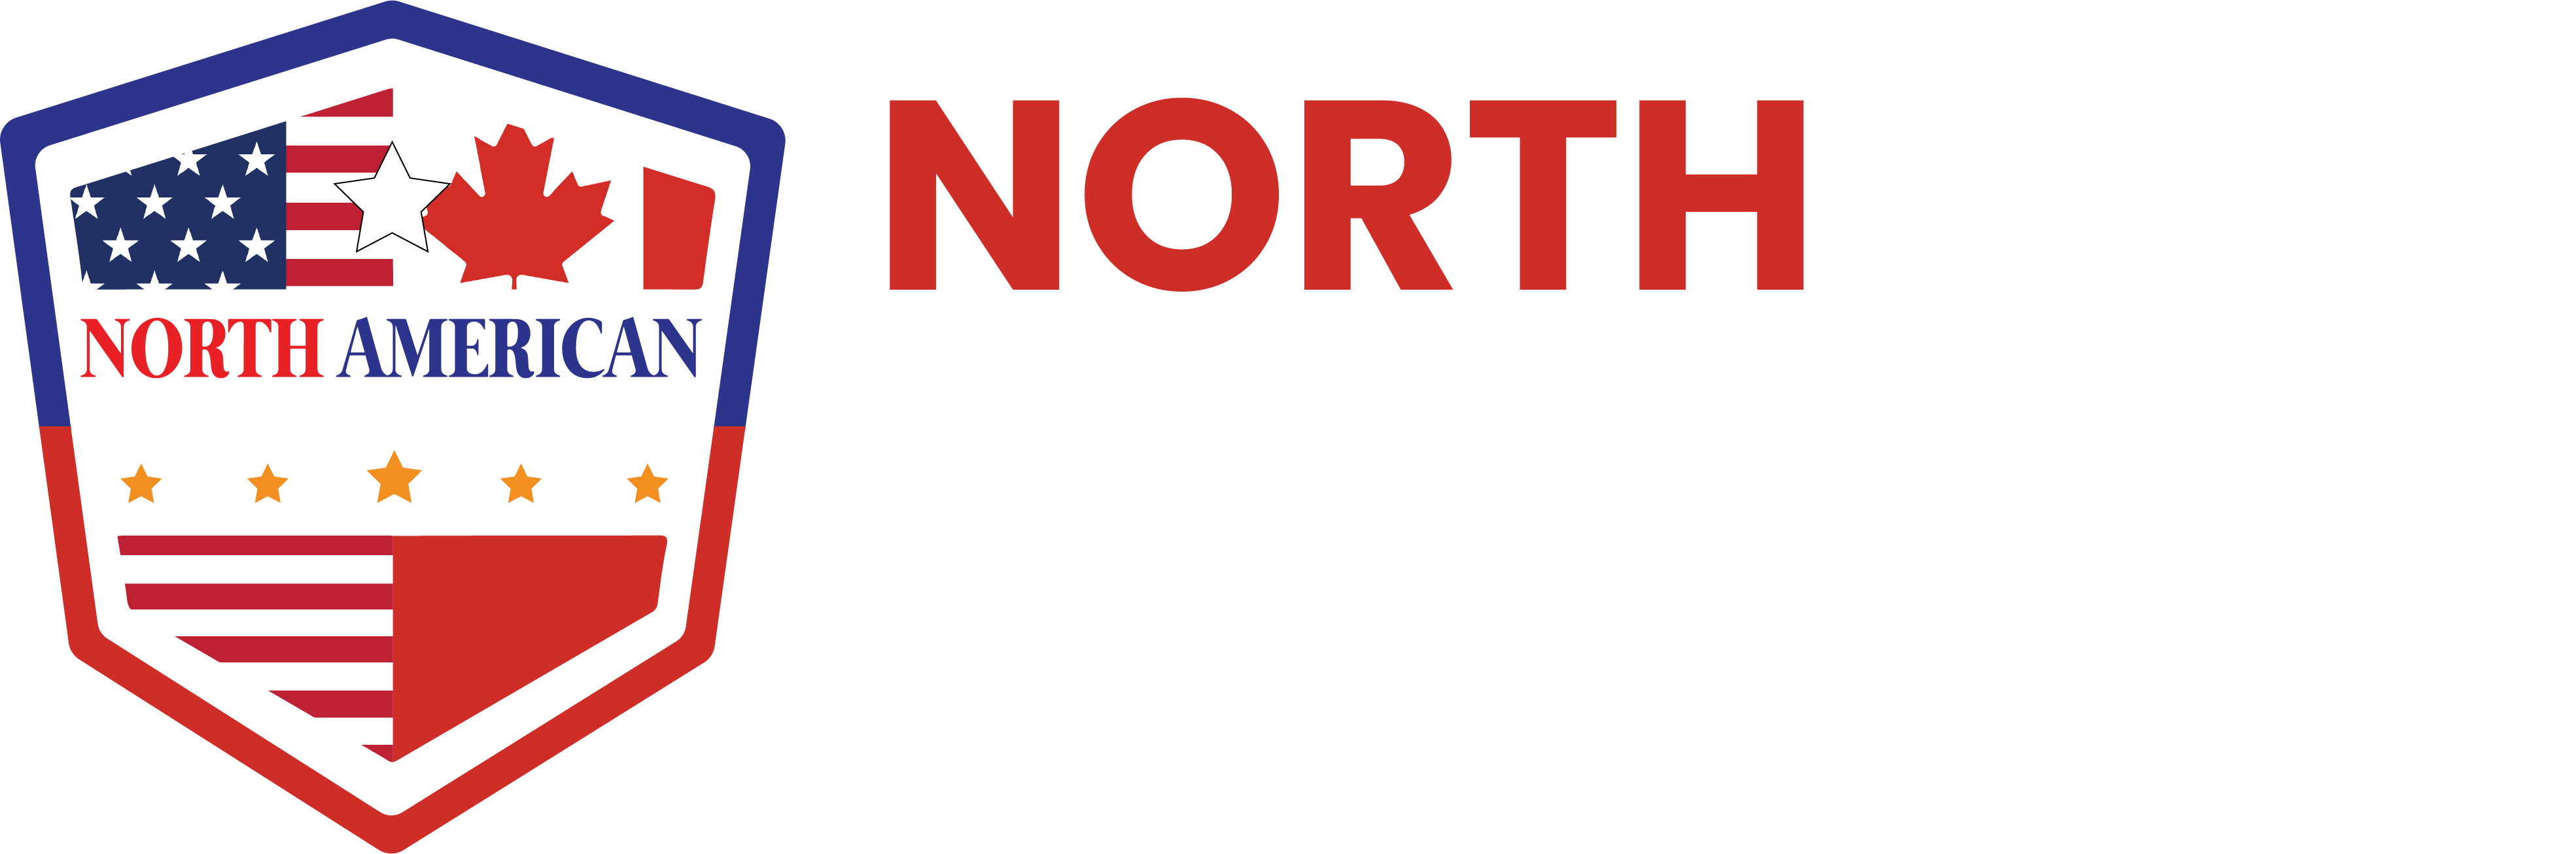 North American Security Services